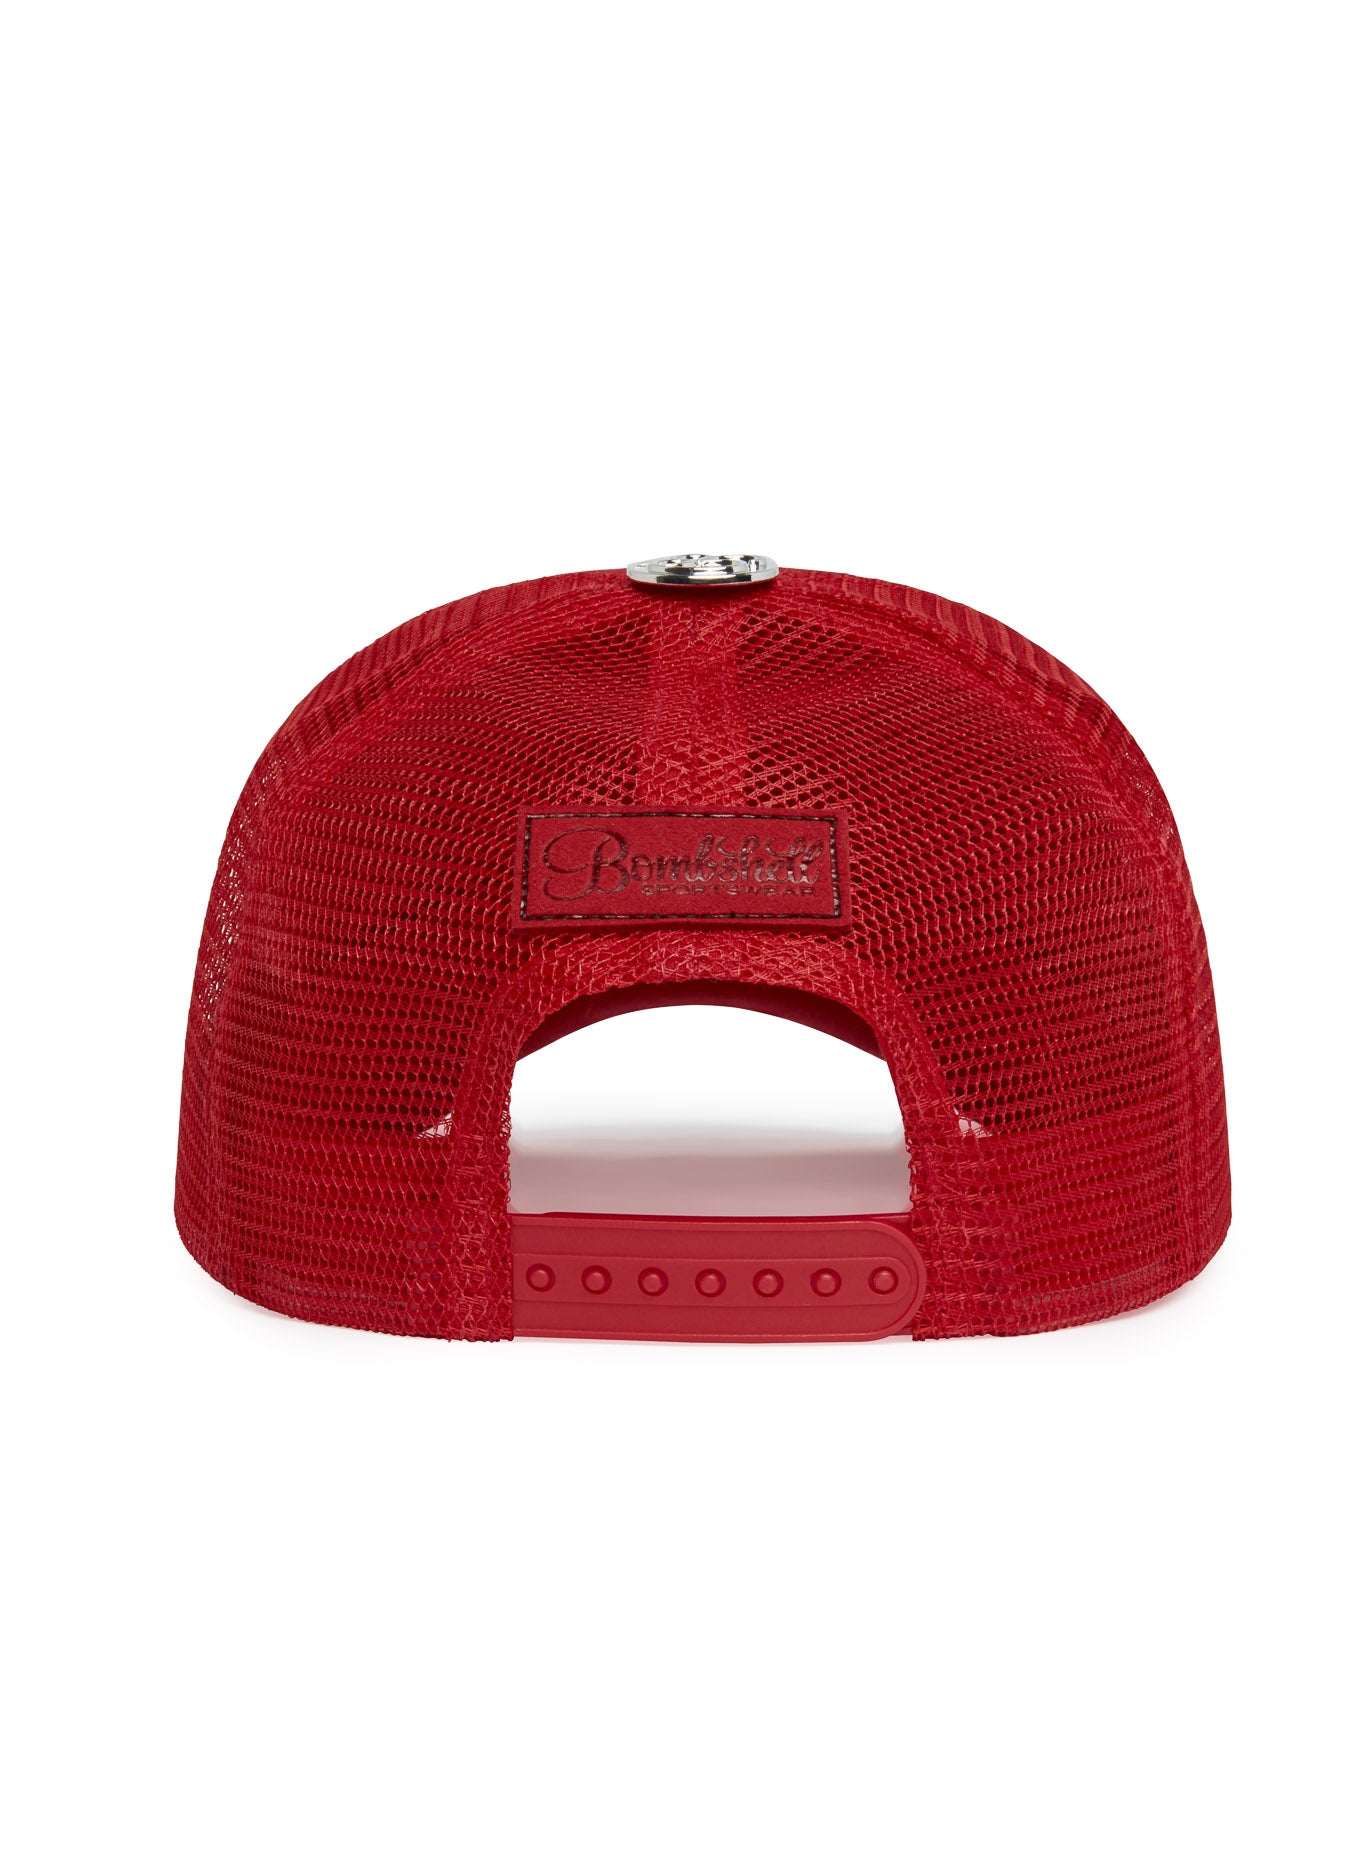 back view of our red denim crocodile hat